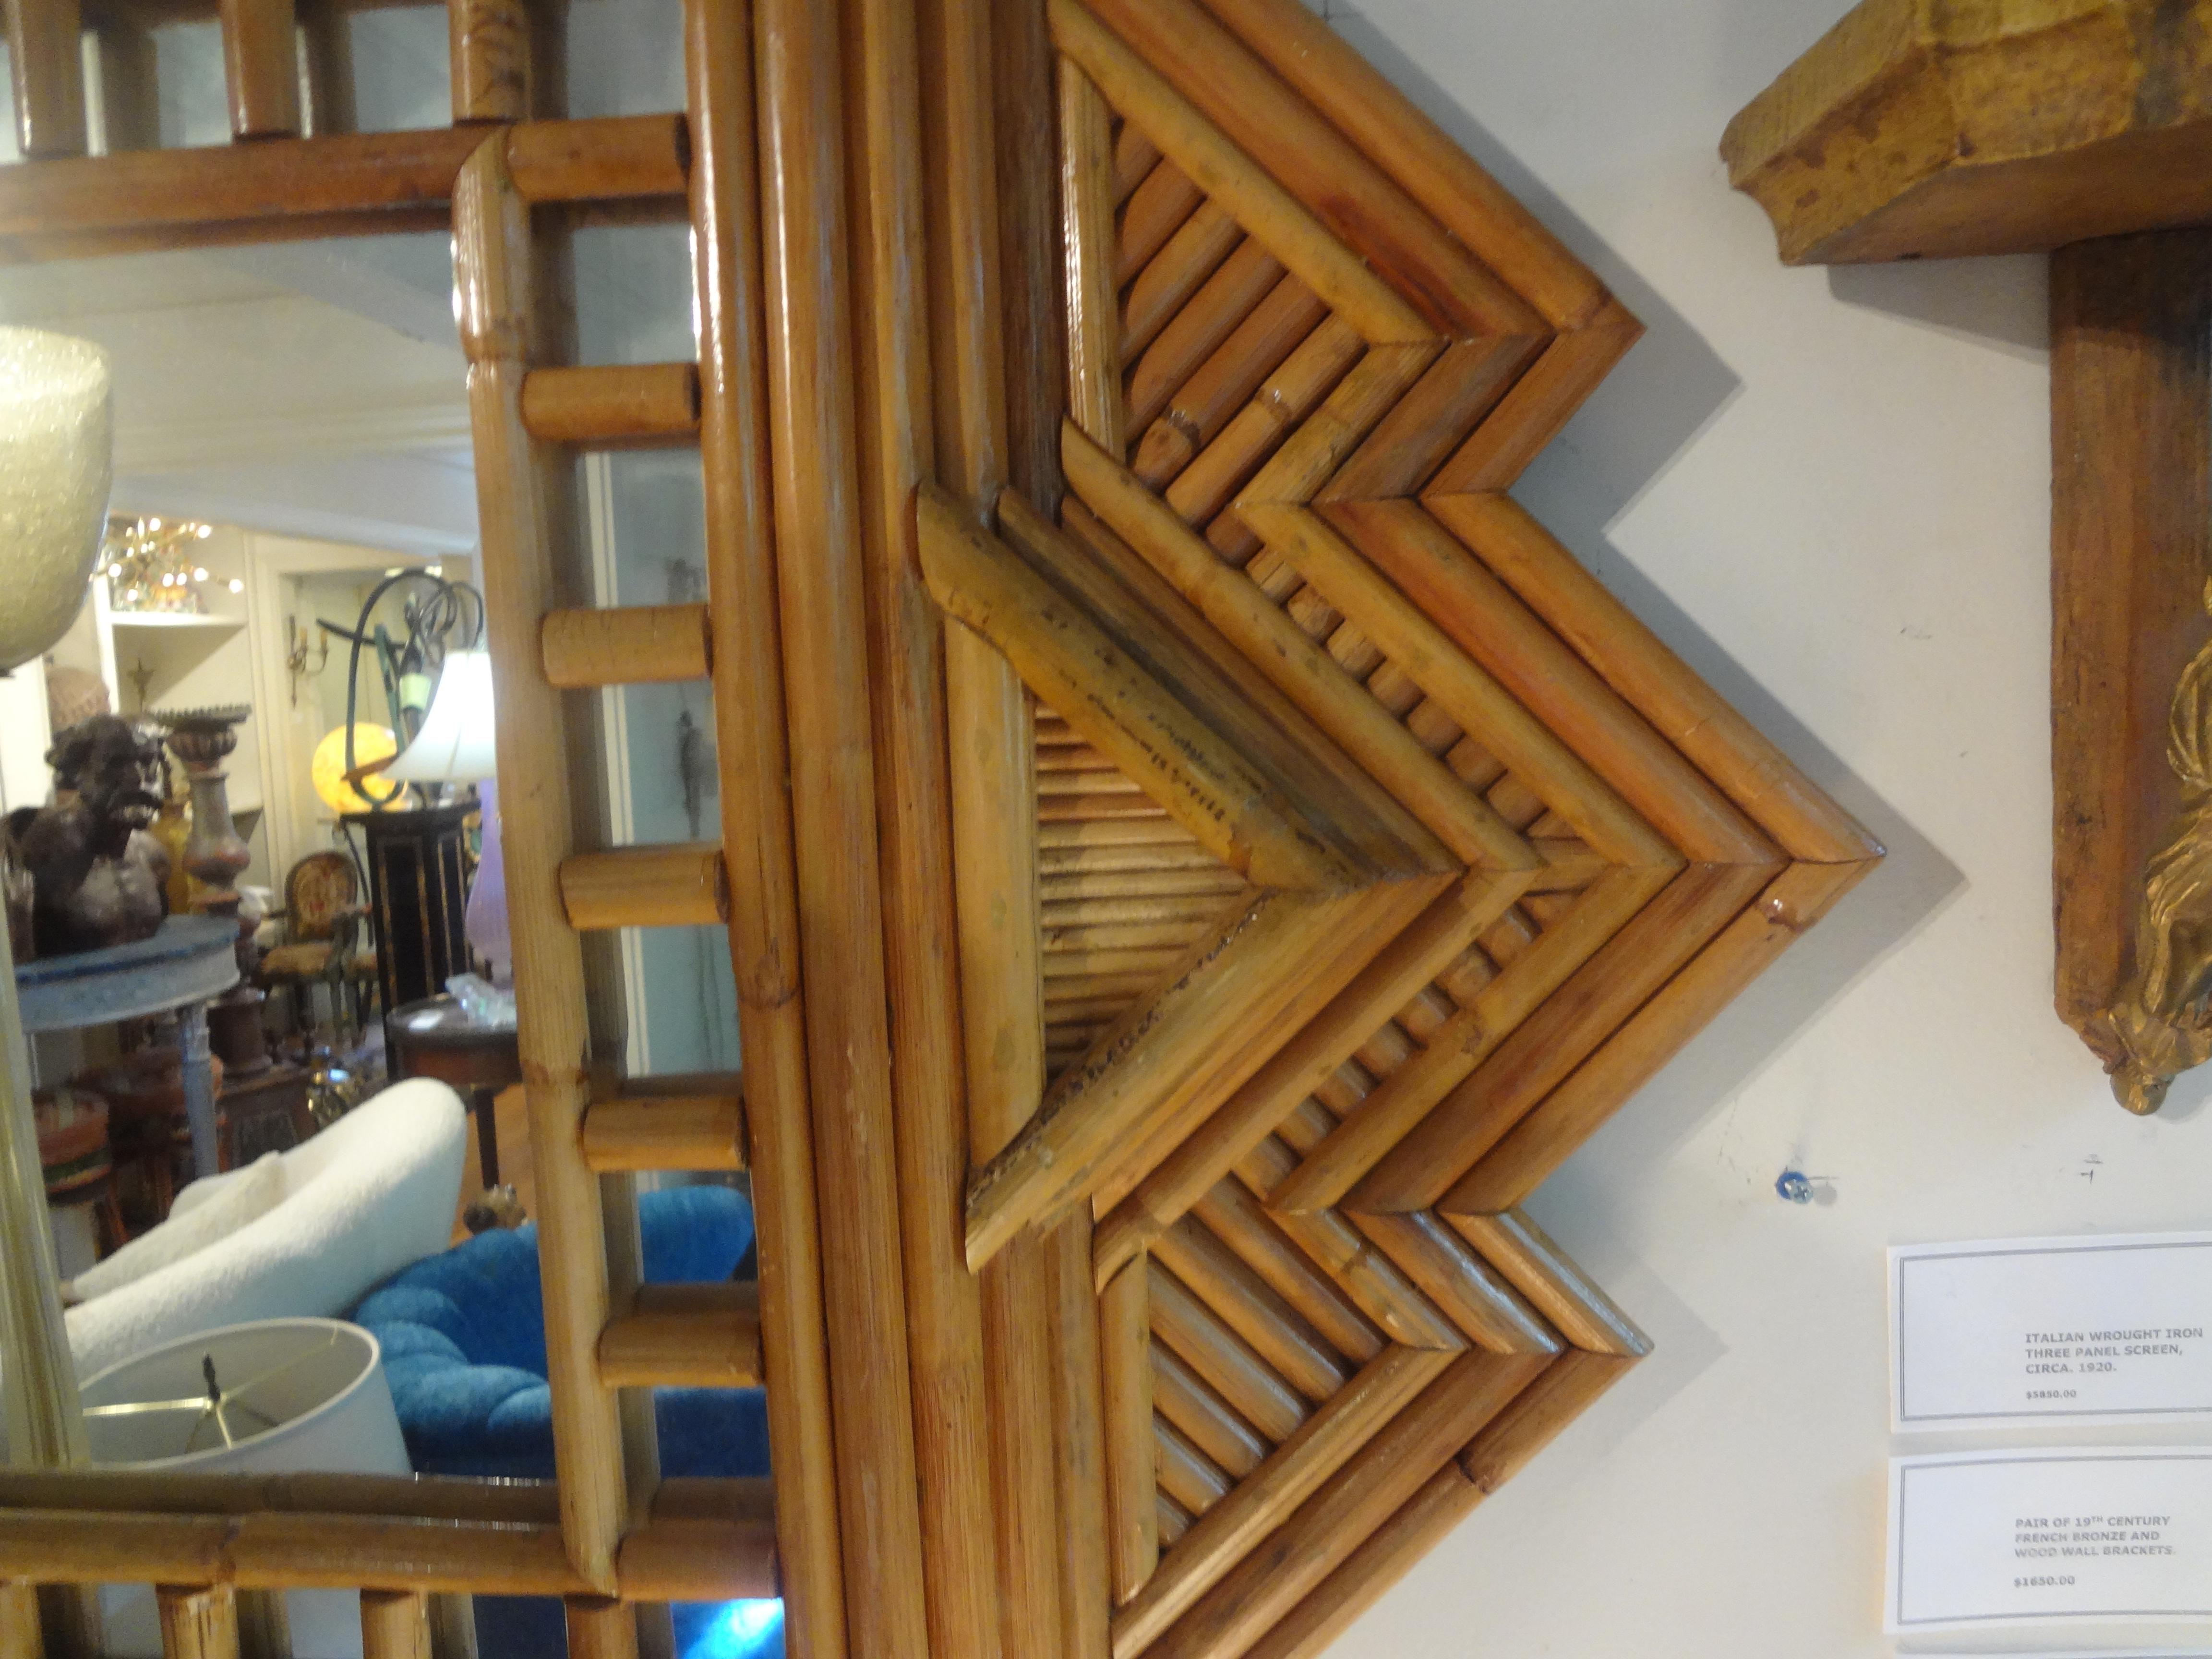 Italian Bamboo Mirror By Maurizio Mariani For Vivai del Sud In Good Condition For Sale In Houston, TX